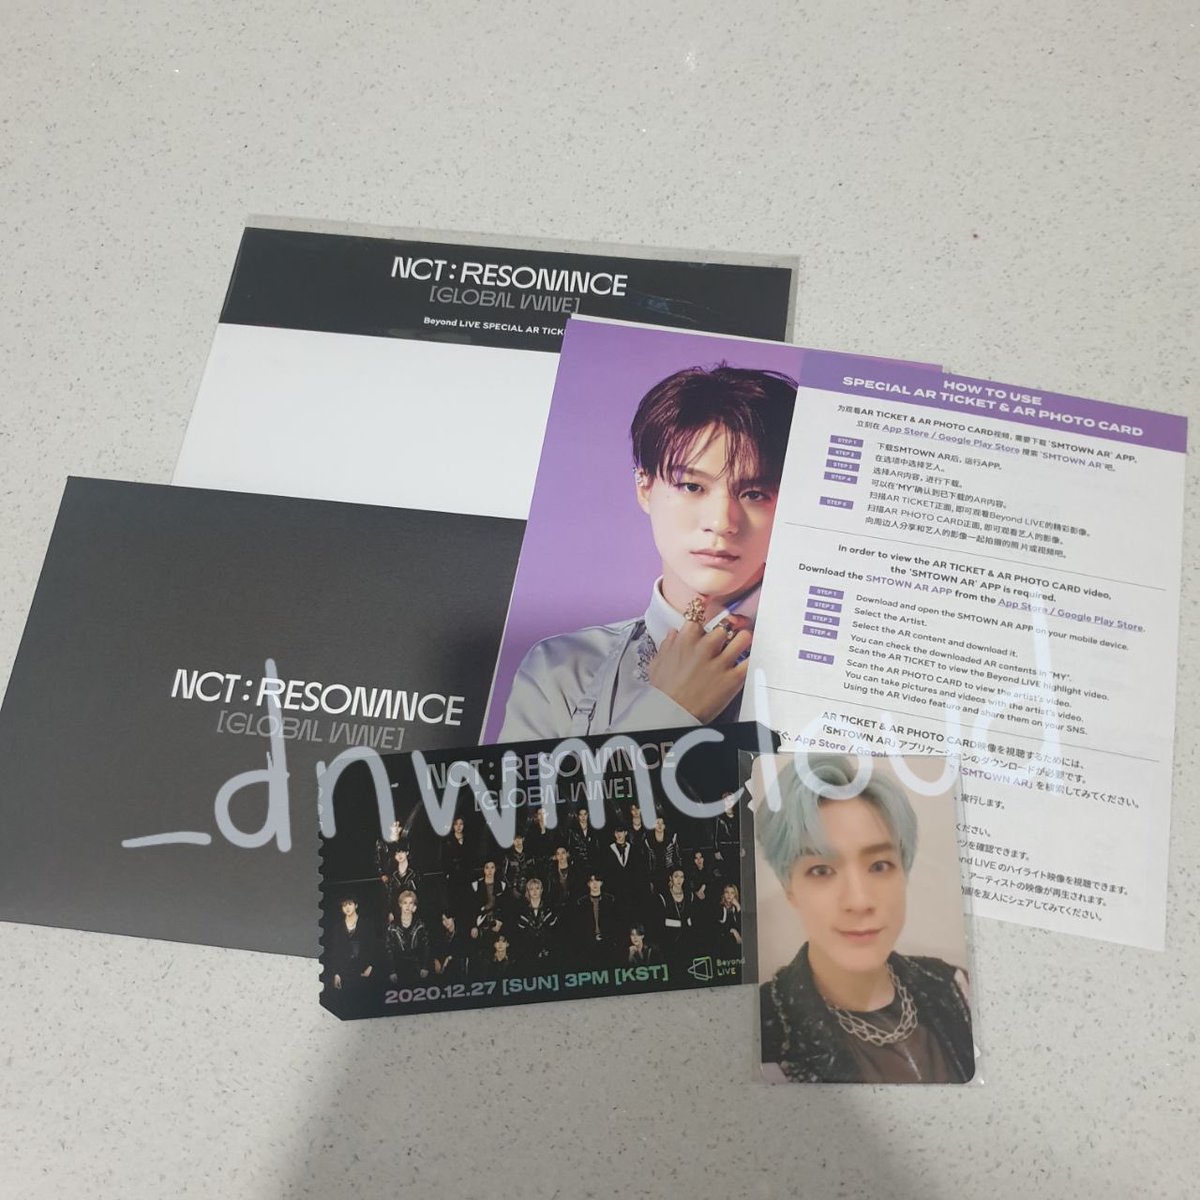  JENO ALBUM AND NON-ALBUM PCS  17,500 PHP exclusive of packing fee + lsf selling as SET only!!! included breakdown of prices for your reference  form link will be posted under this thread on apr 24, 6PM